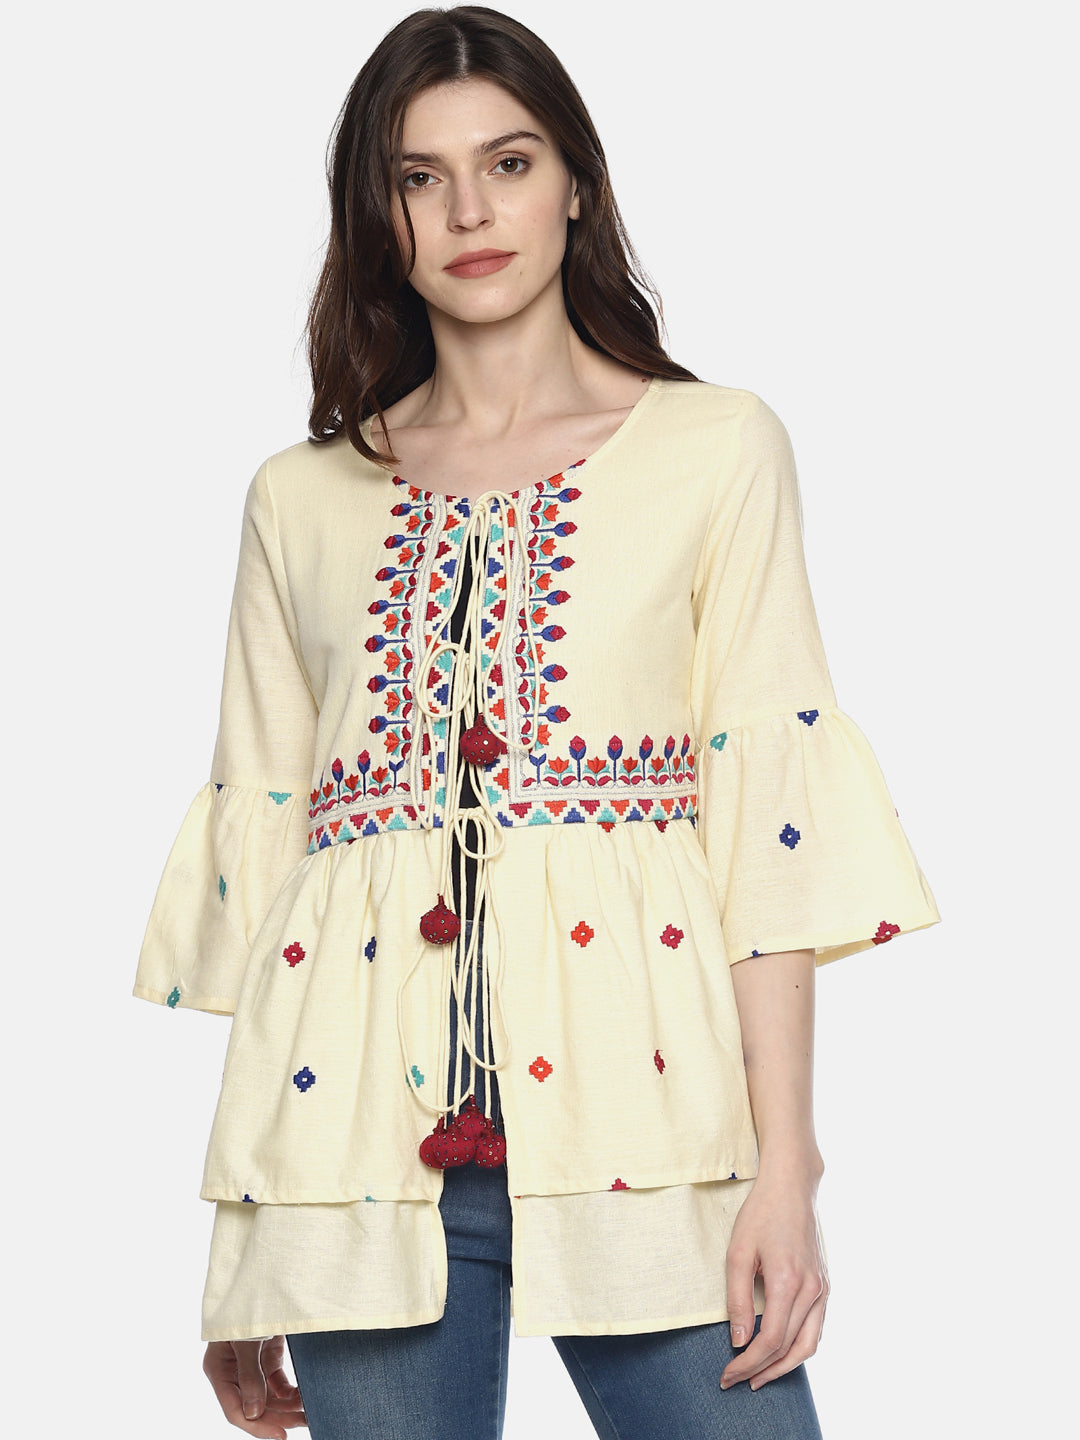 Off White Organic Cotton Shrug With Embroidery | Untung